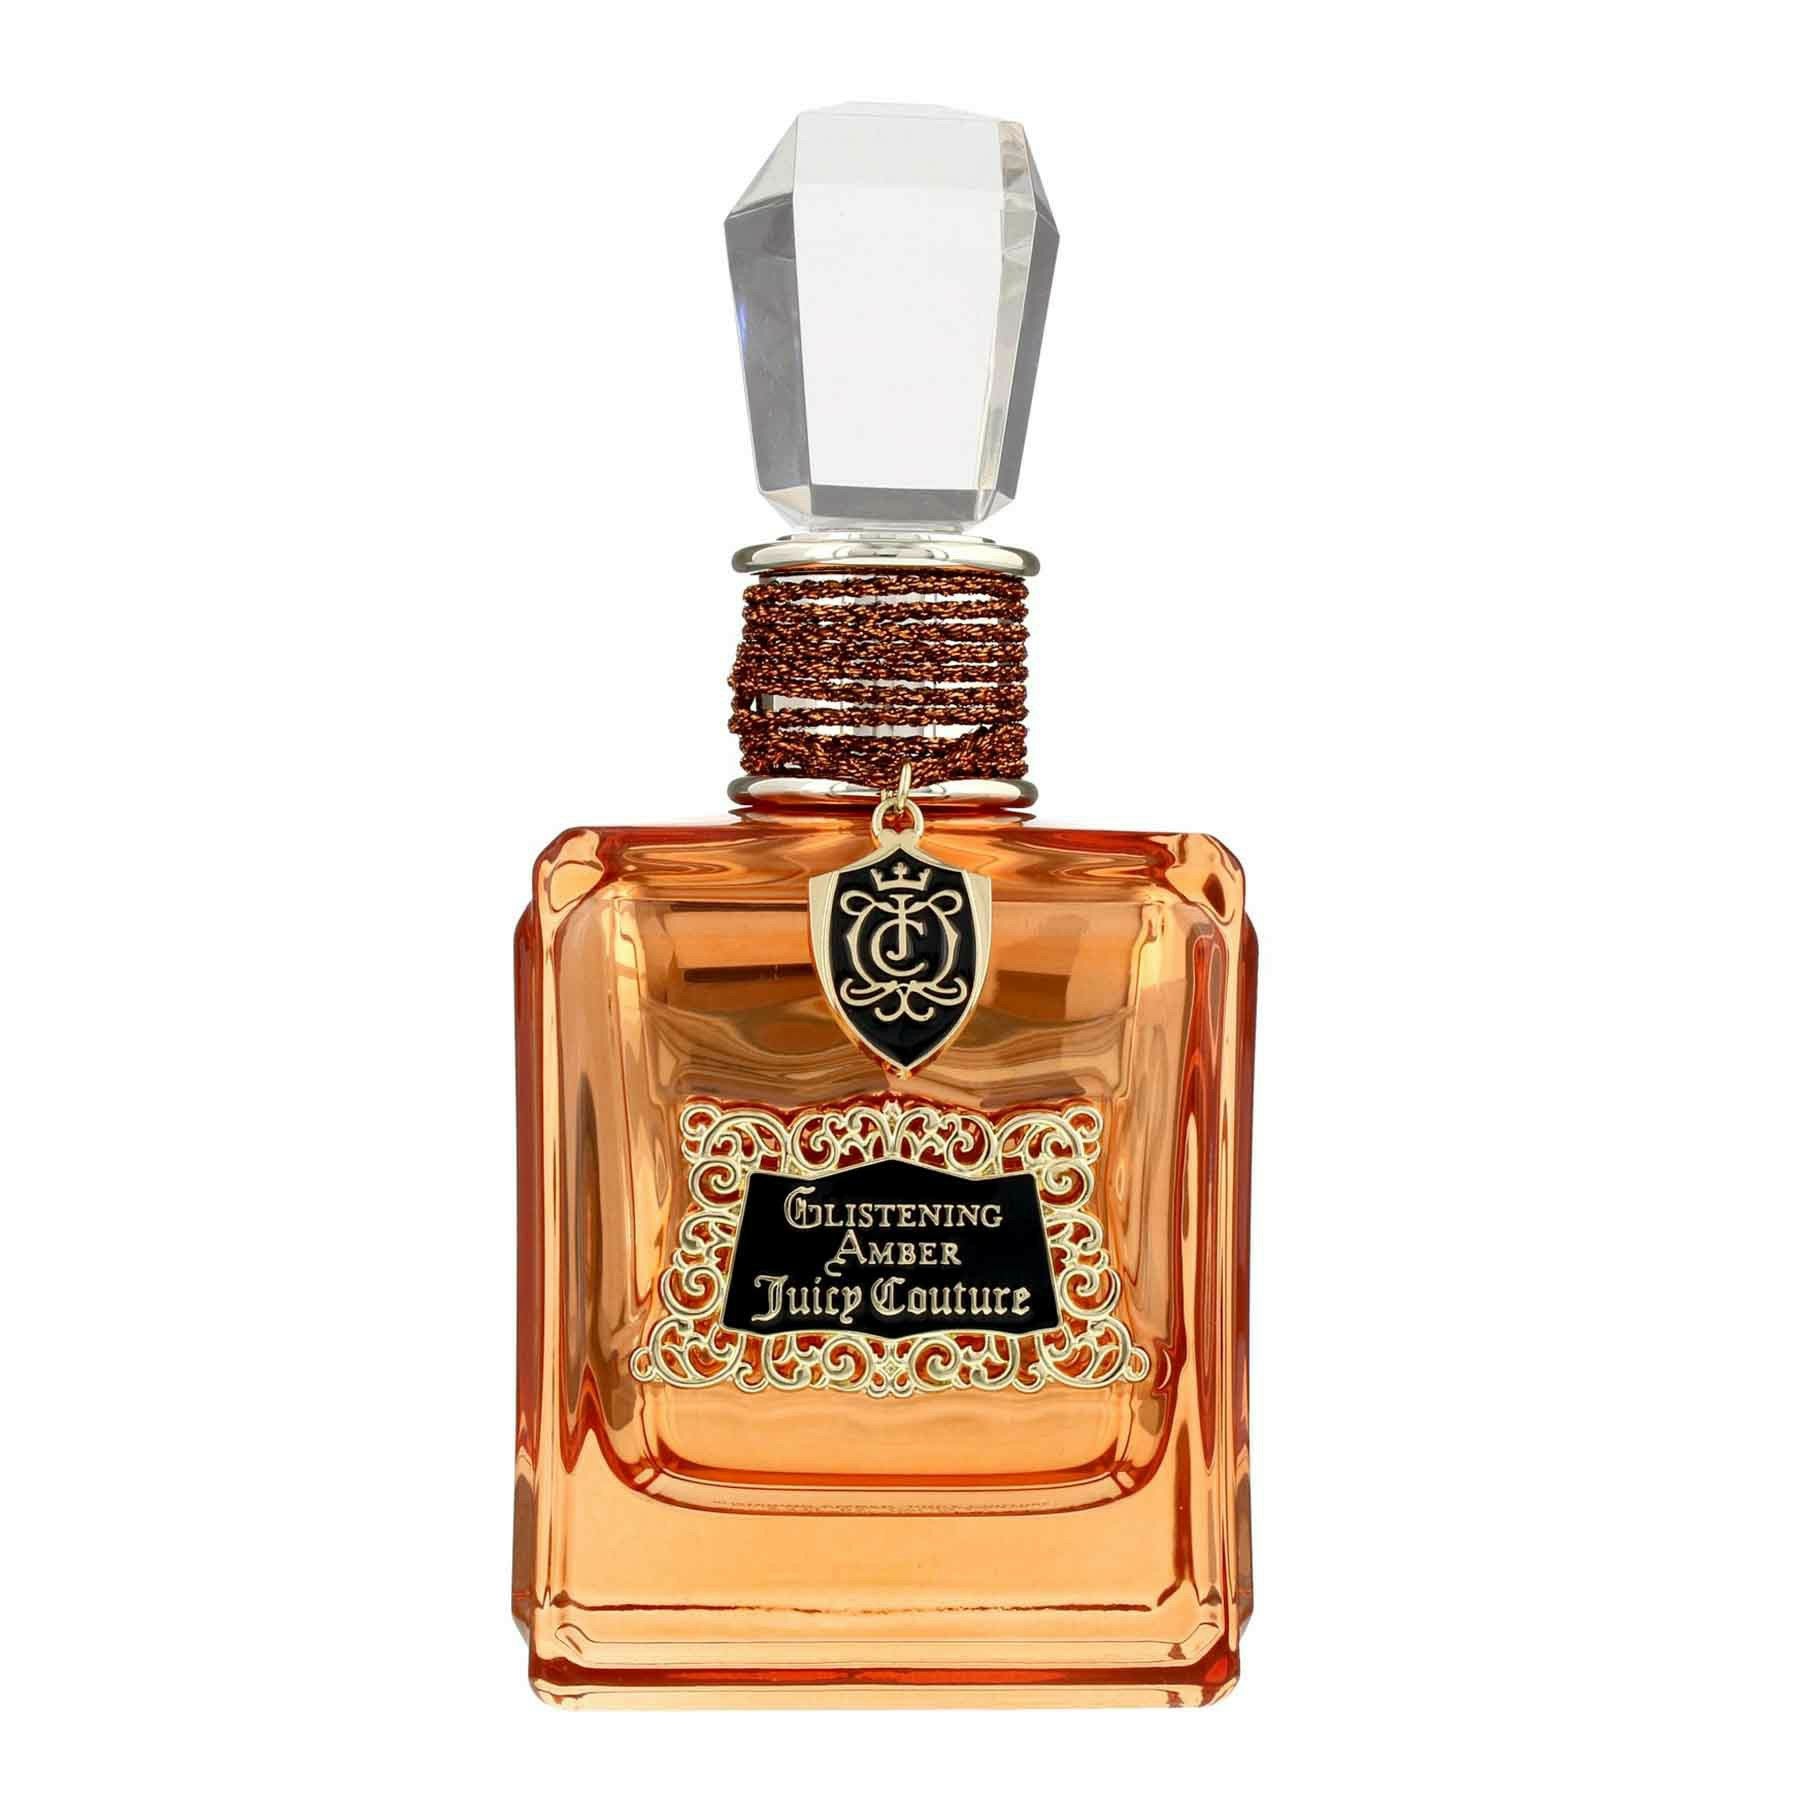 Juicy Coutureglystening Amber for Women by Juicy Couture